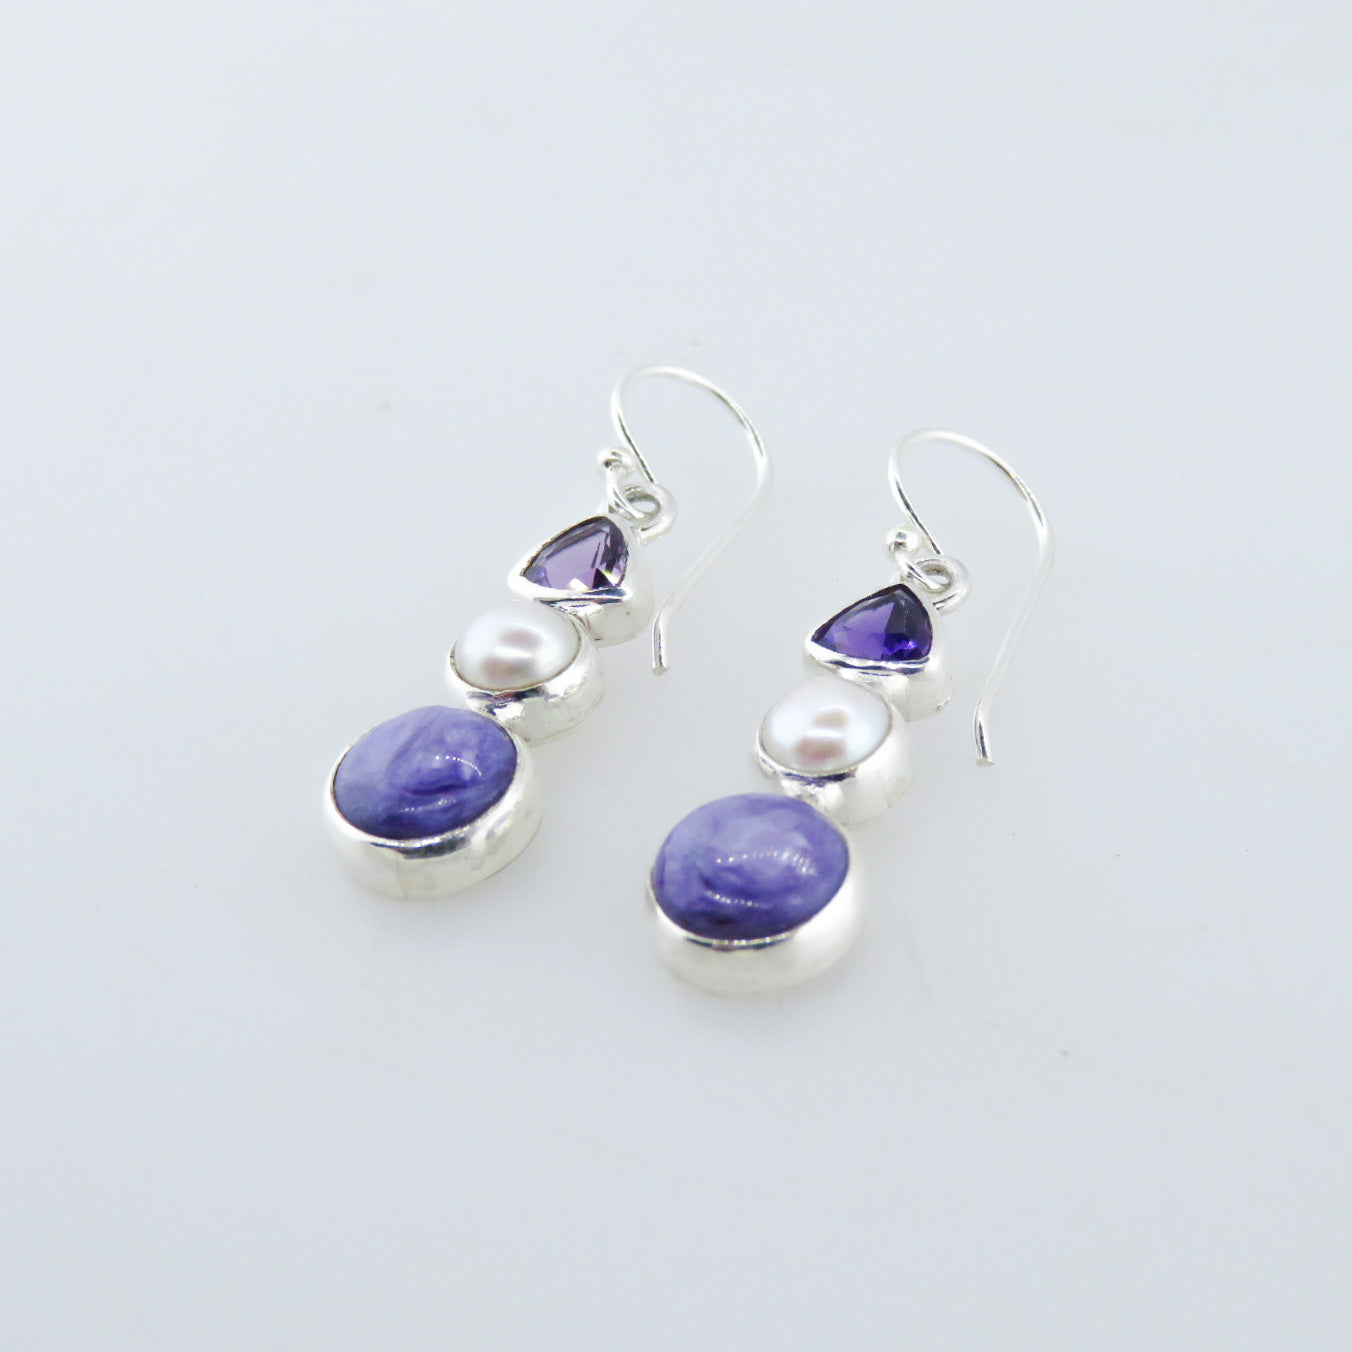 Charoite Sterling Silver Earrings with Amethyst and Fresh Water Pearls